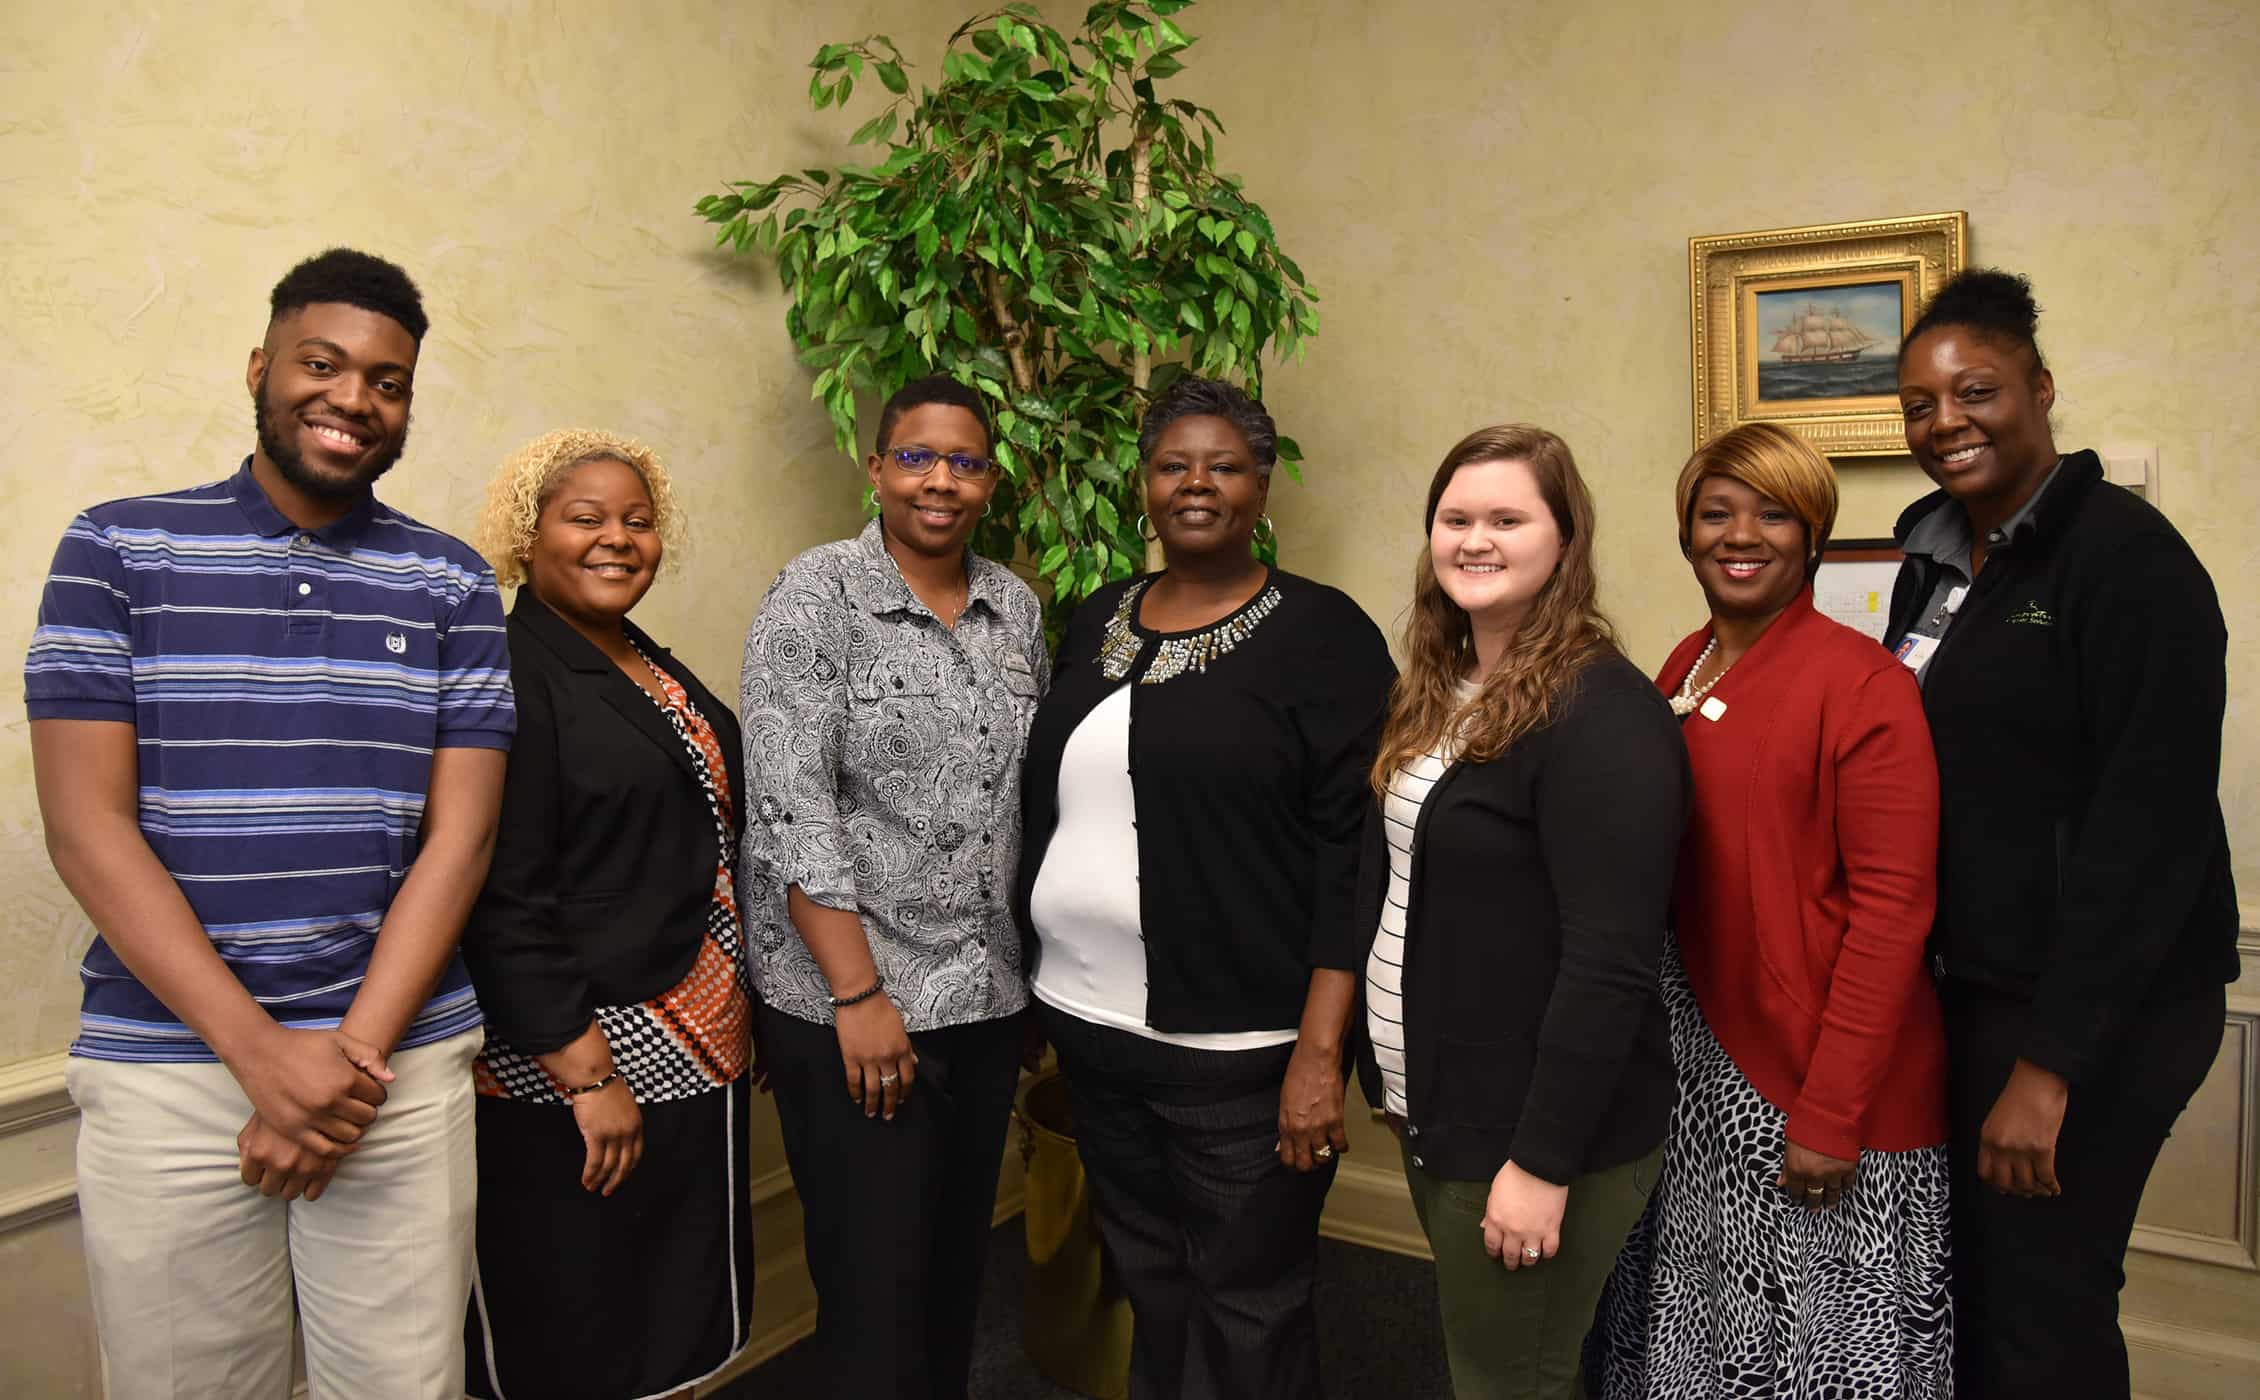 From left to right stand SGTC Marketing Management advisory committee members Brodrick Parks, Dr. Andrea Oates, Jamie Jones, Mary Cross, Leah Windham, Andrea Tatum and Jessica Wright.